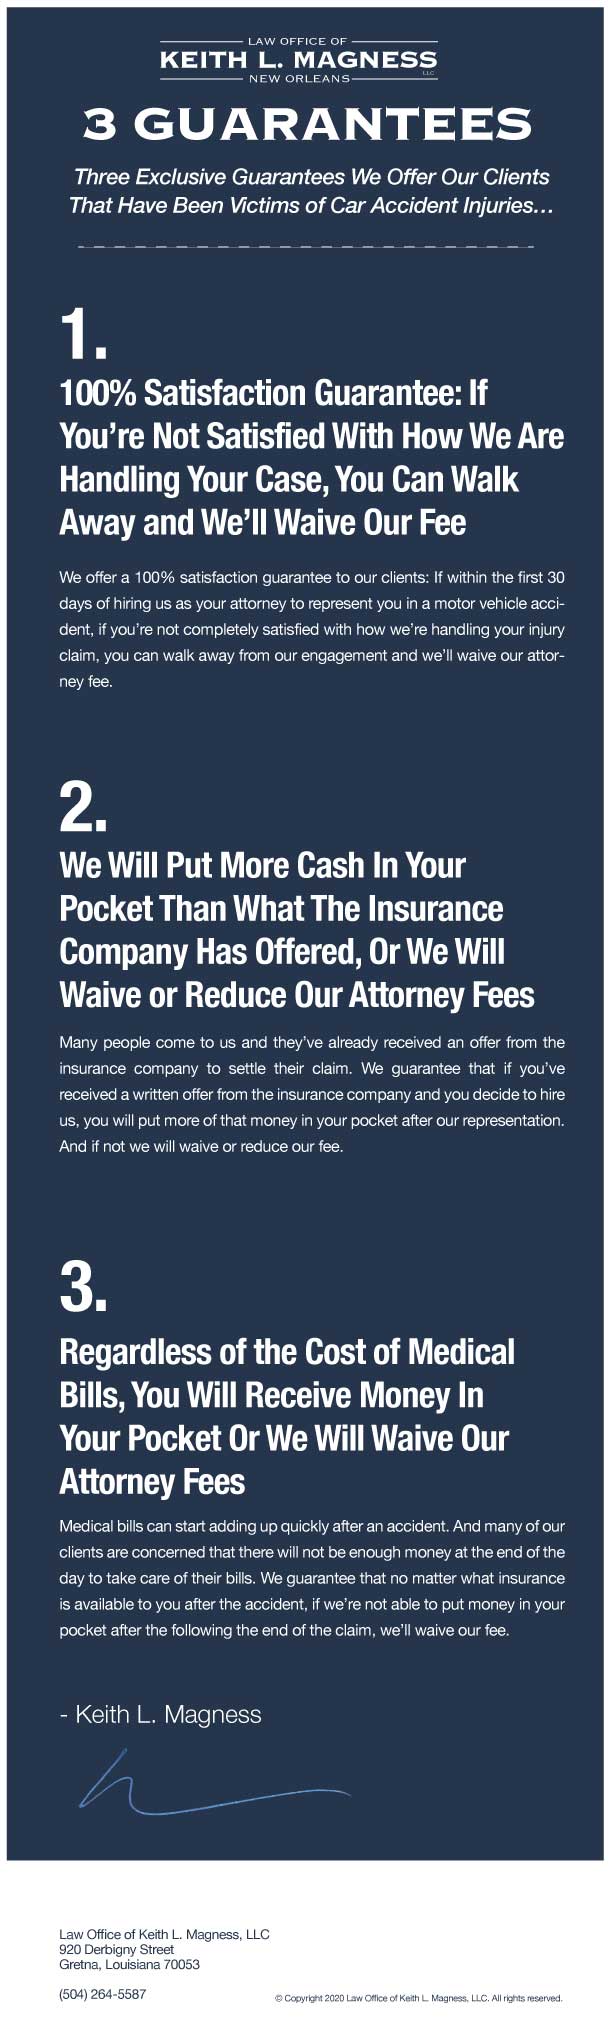 infographic: three guarantees to victims of car accident injuries: 1) 100% satisfaction guarantee, 2) more cash than the insurance company is offering, 3) will receive money regardless of medical costs or will waive fee